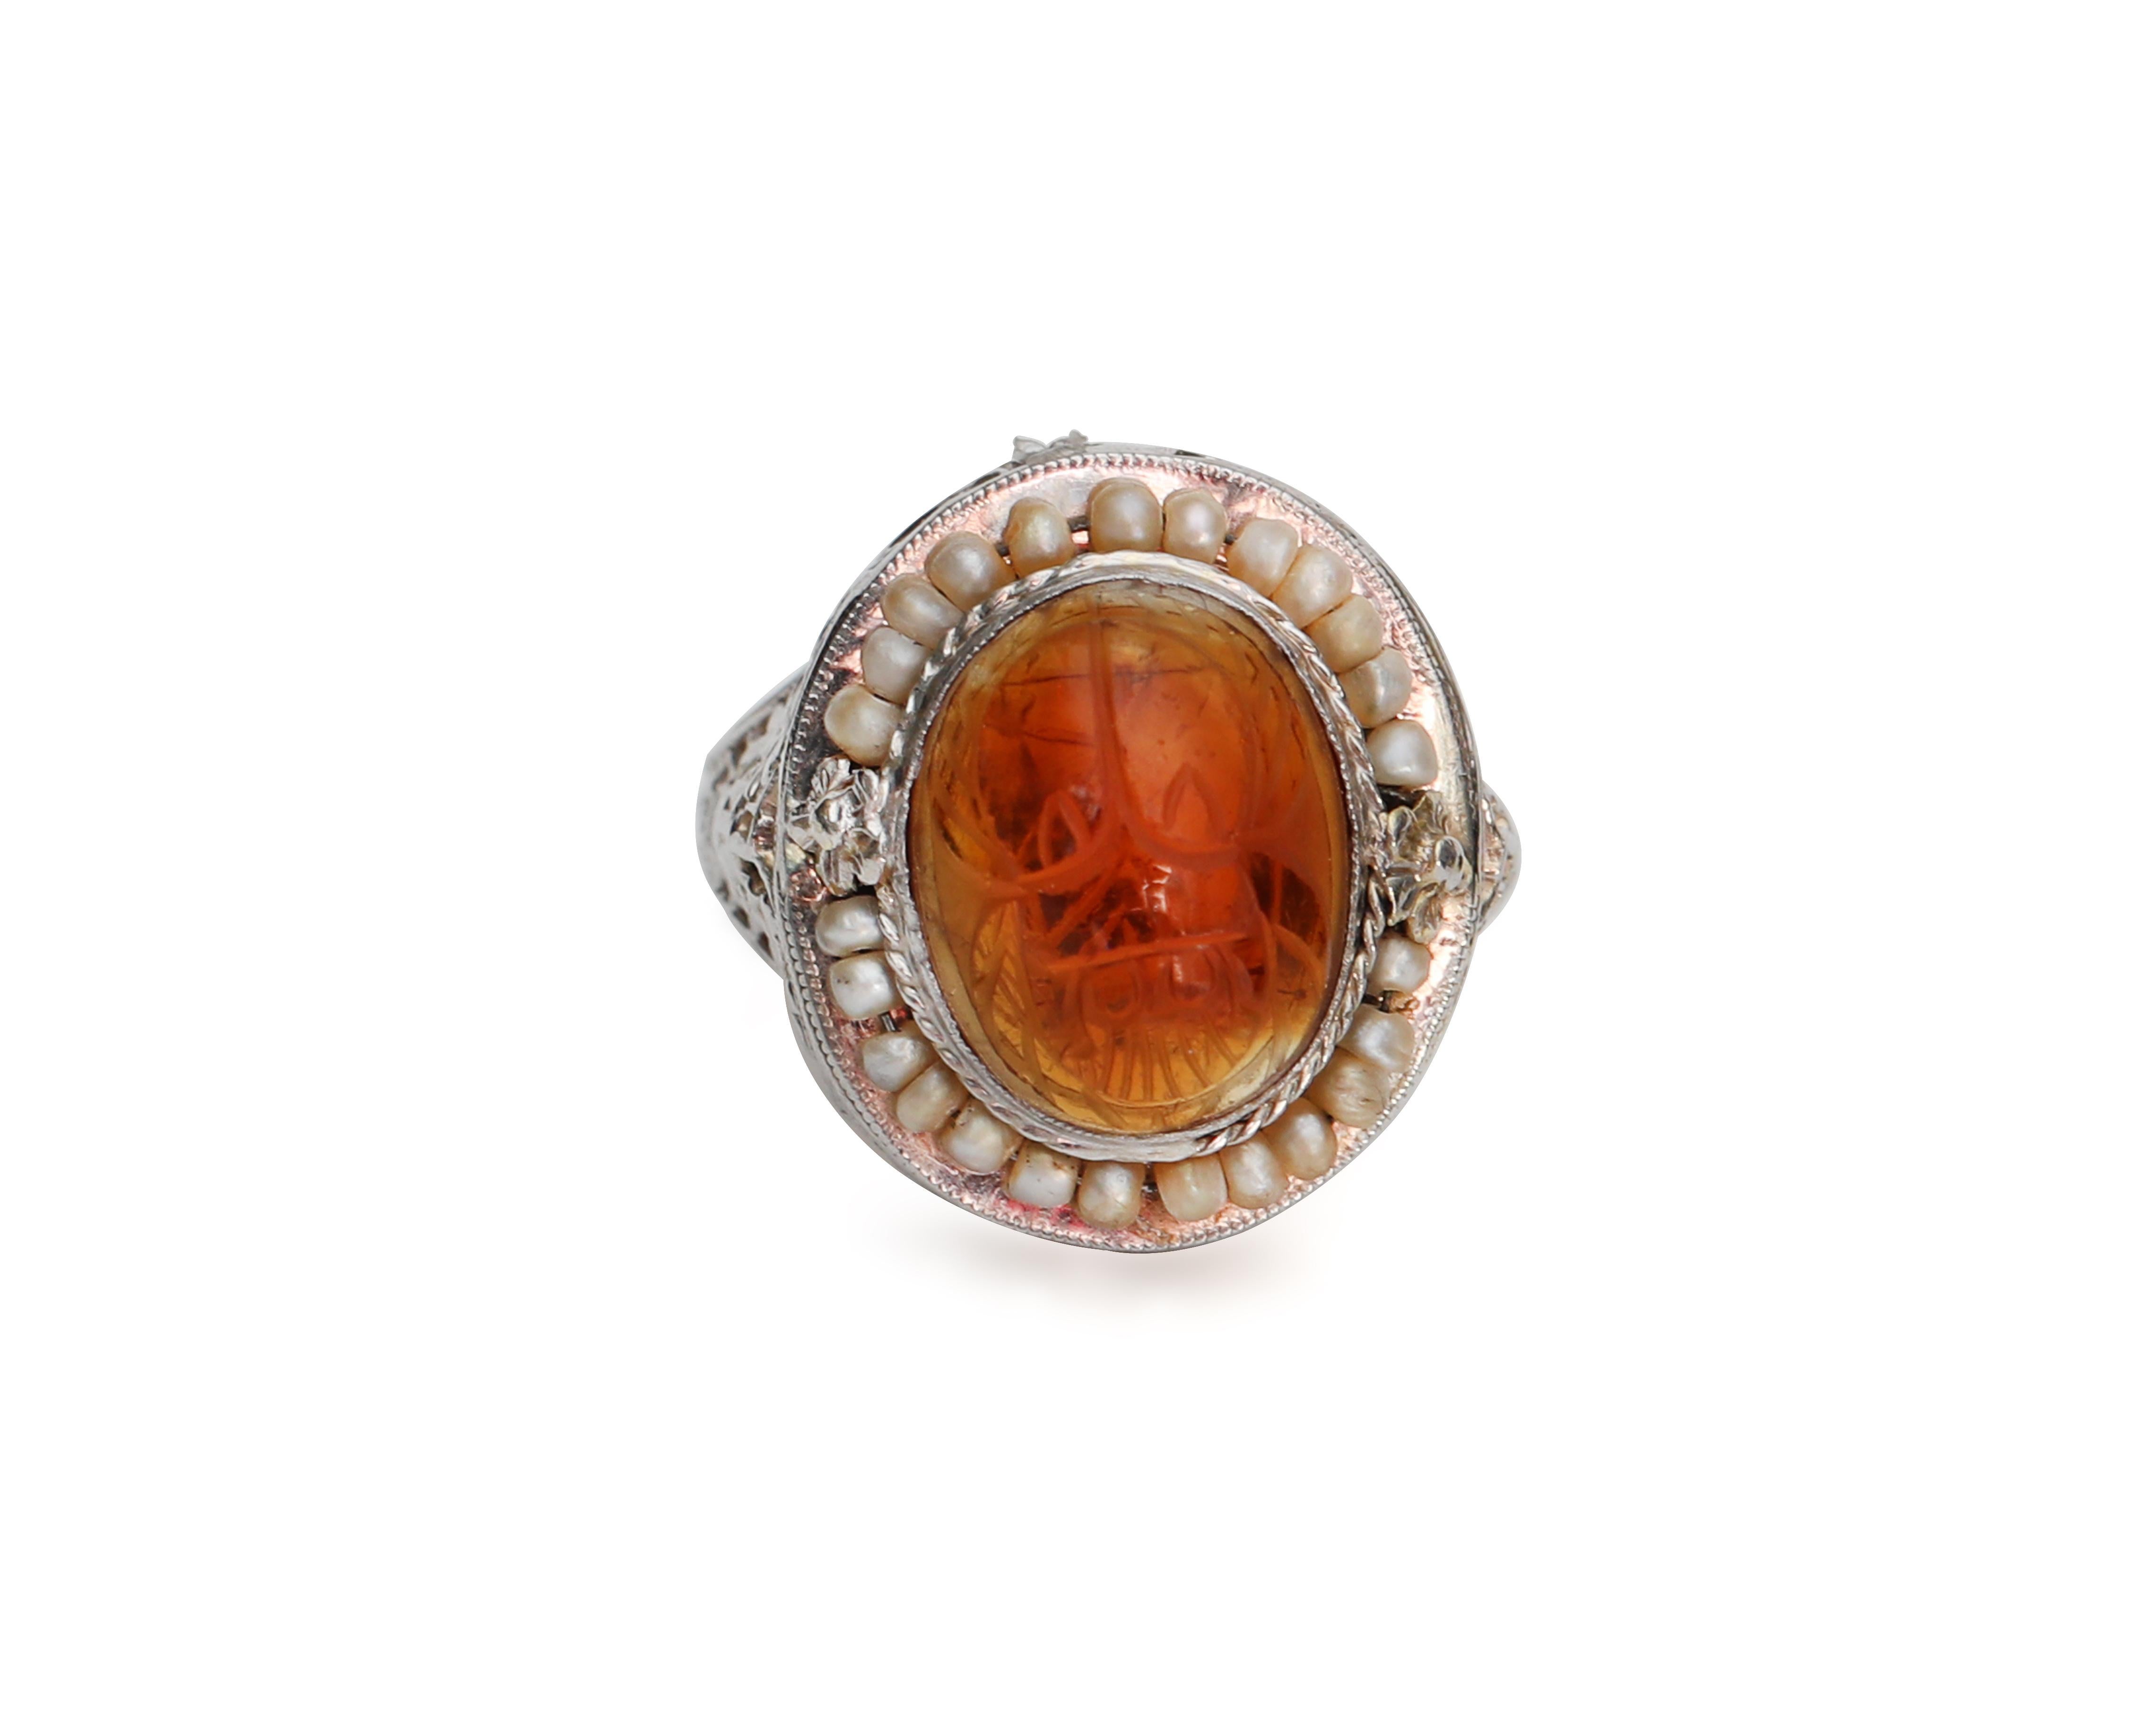 This genuine Victorian beauty features a carved carnelian oval cab surrounded by a dancing seed pearl halo perched atop an intricate 14 karat white gold filigree ring. Although this fine example of late victorian style is over 120 years old, it is